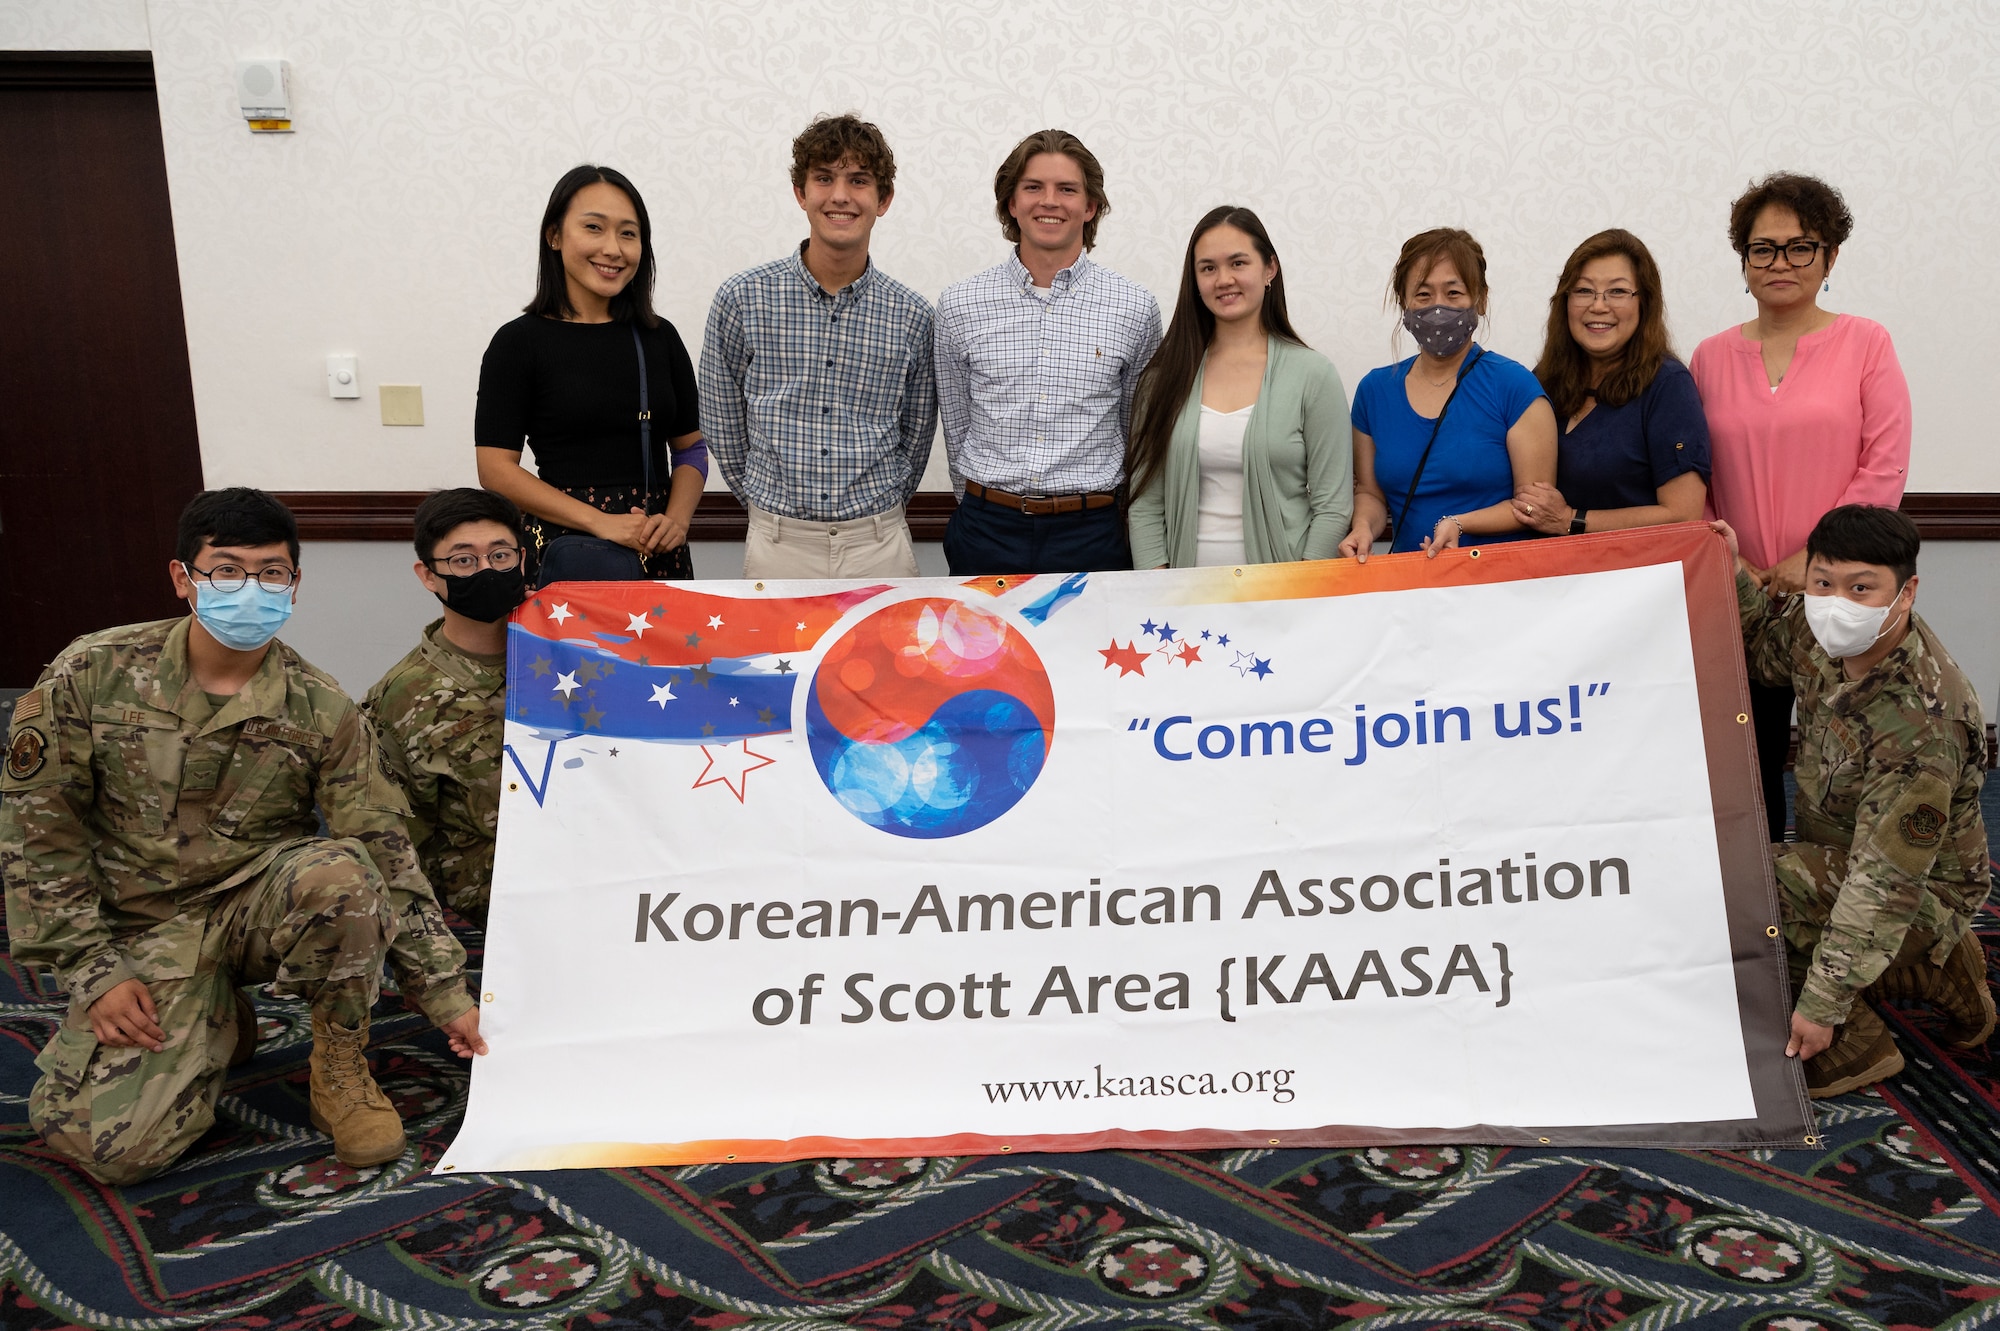 U.S. Air Force Members, and local high school students gather around a Korean American Association of Scott Area banner after being awarded scholarships on Scott Air Force Base, Illinois, May 27, 2021. KAASA is a non-profit private organization that supports the local community through charity and educational outlets, and through donations they awarded $1,000 scholarships to students Danielle Chao, Alex Tillock, and Brady Martinez. (U.S. Air Force Photo by Airman 1st Class Isaac Olivera)